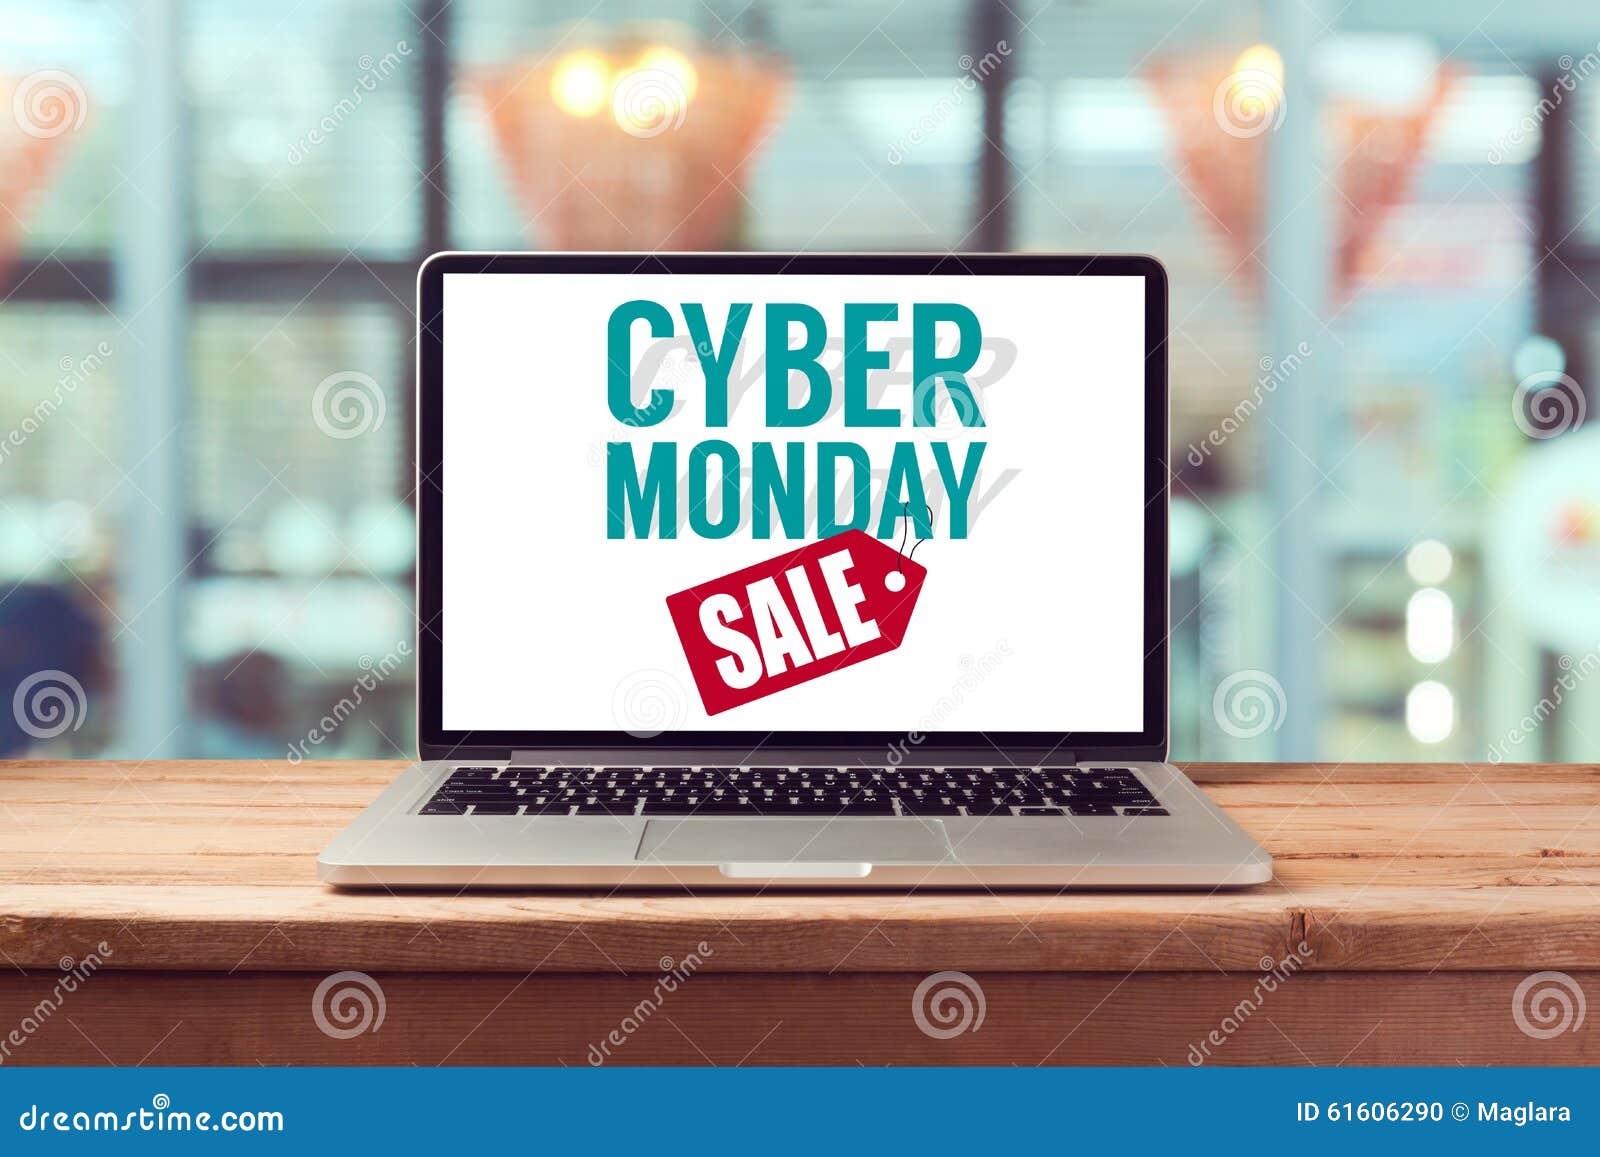 cyber monday sign on laptop computer. holiday online shopping concept. view from above